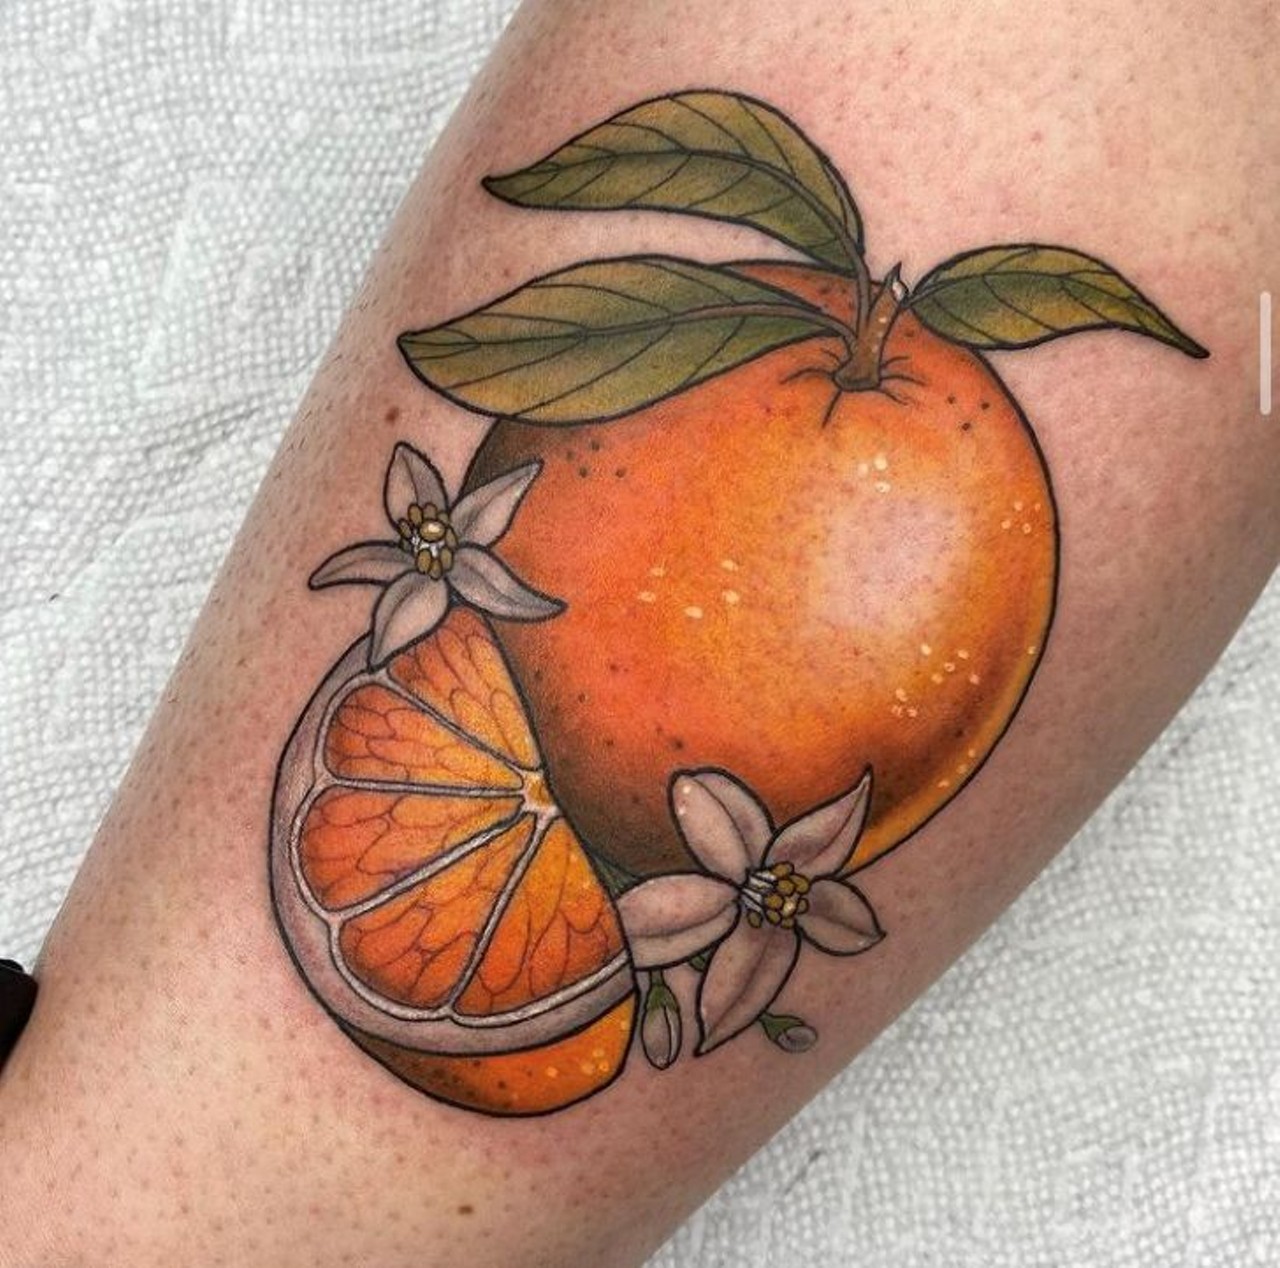 Delaney Bannar 
Chicago Tattoo Co.
1790 FL-436, Winter Park, 407-678-8858
Delaney Bannar&#146;s botanical, illustrative, and neo-traditional tattoo work is one of the latest additions to Chicago Tattoo Co. 
Photo via delaneytattoos/Instagram